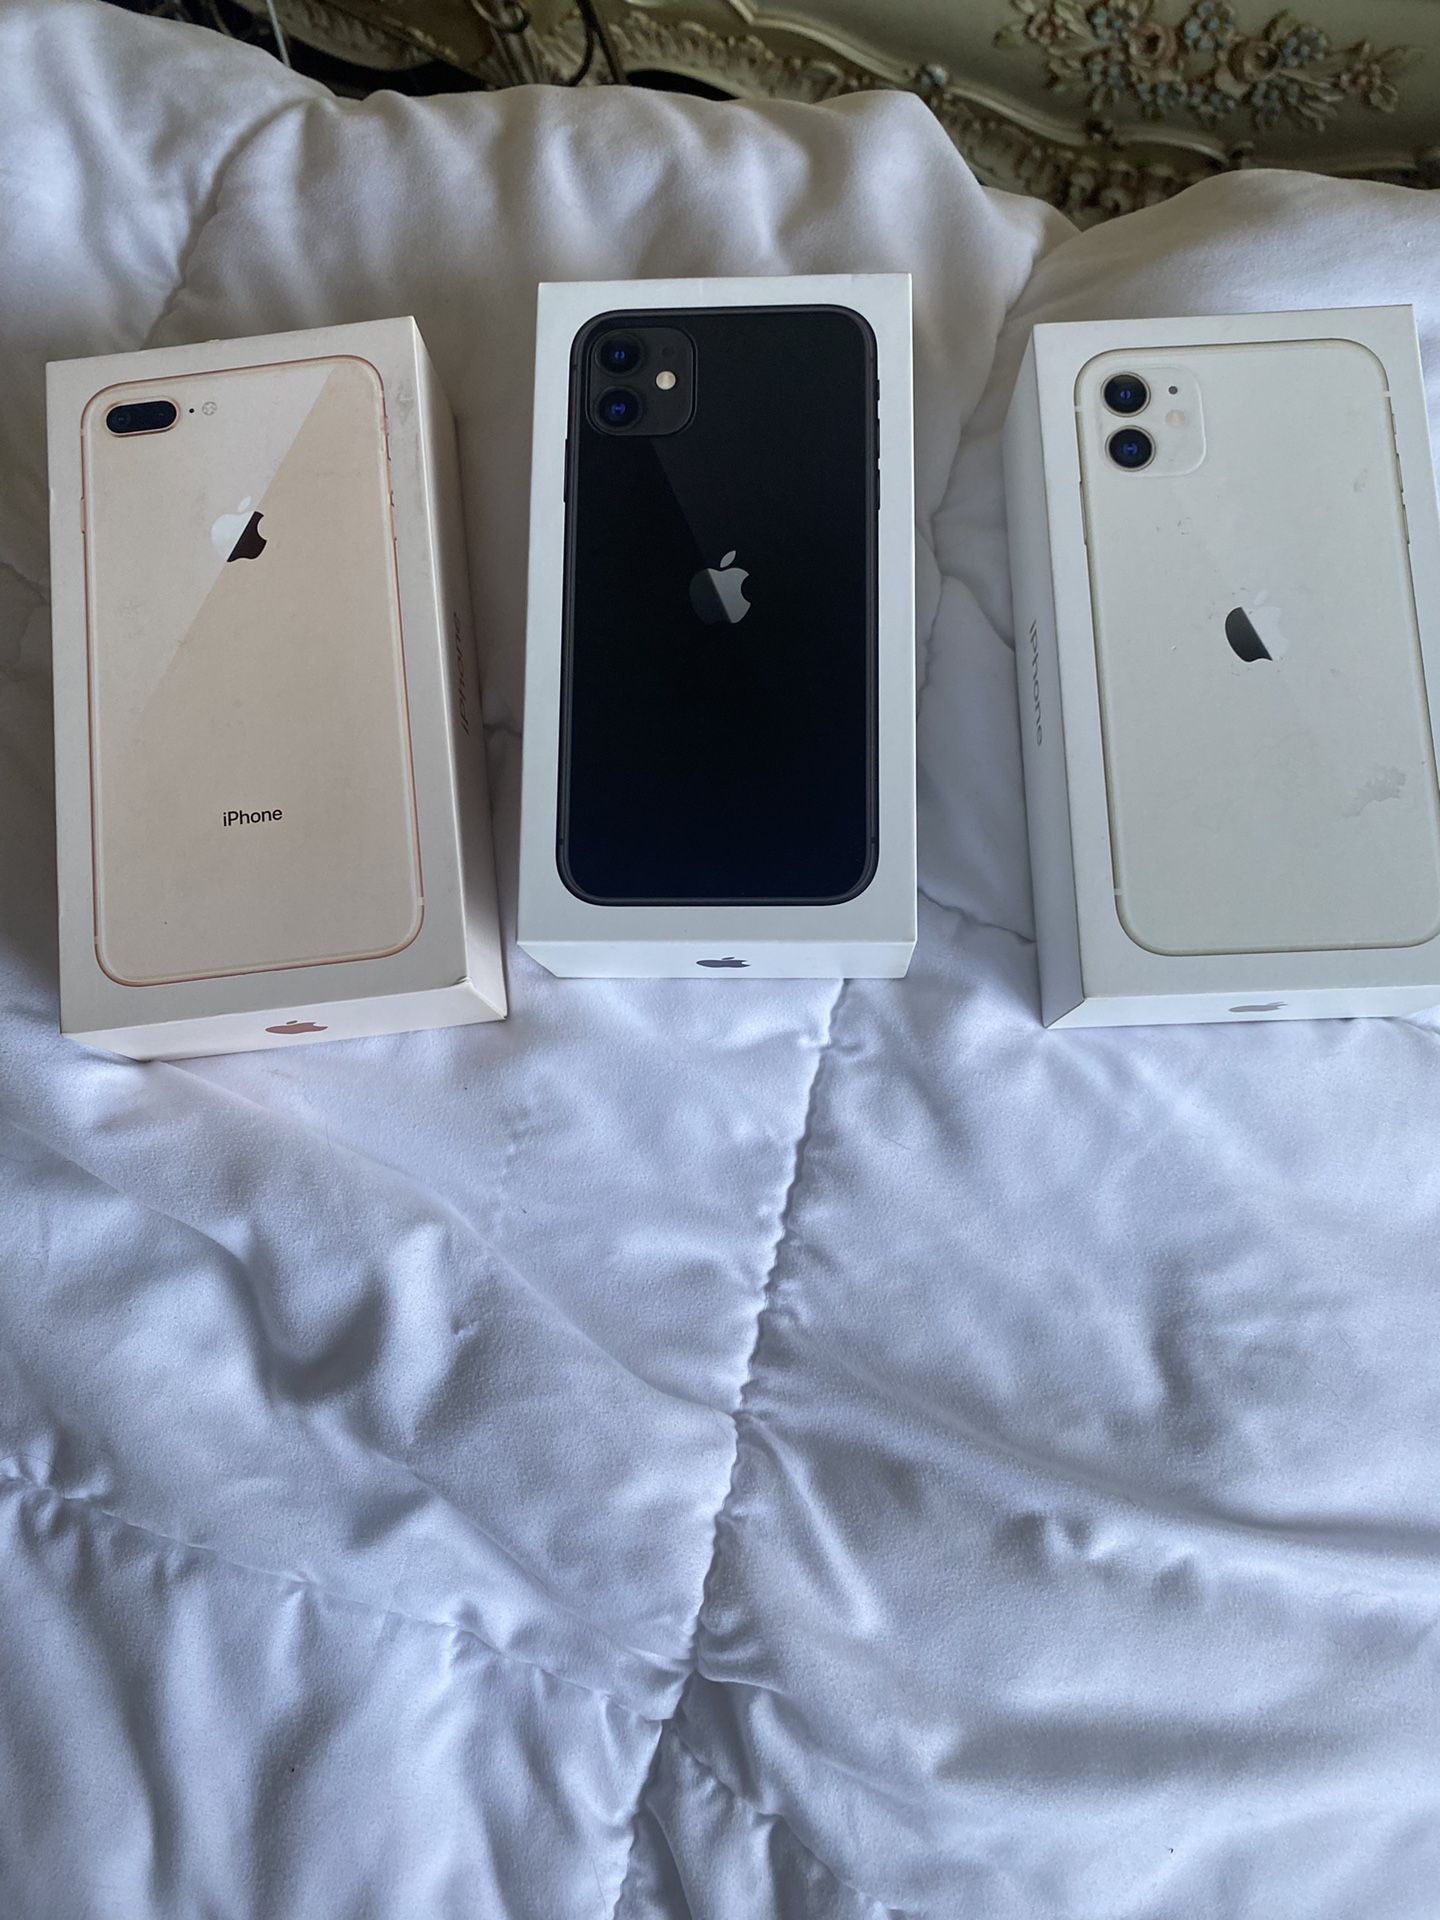 IPHONE Empty Boxes looks New ! IPhone 8 Plus -IPhone 11 A Lot of Empty Boxes